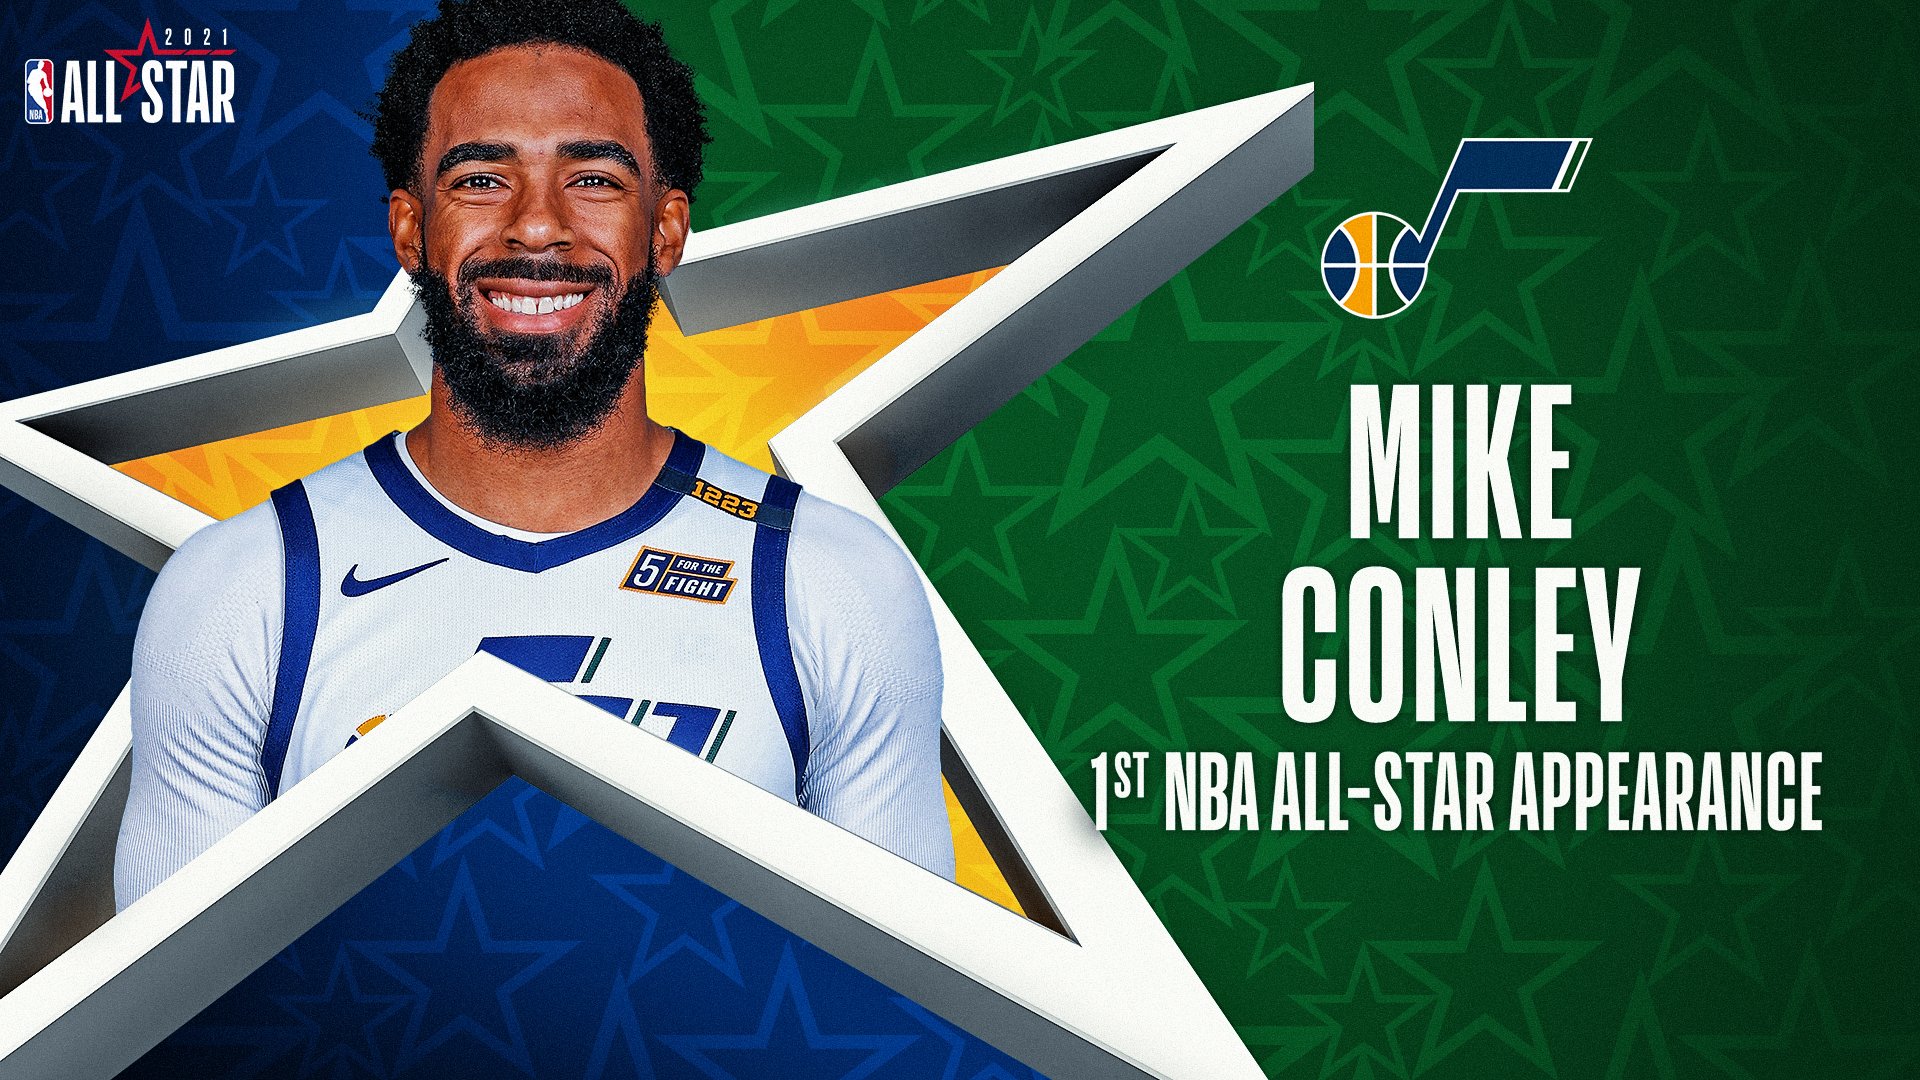 Mike Conley replaces injured Devin Booker in the 2021 All-Star Game